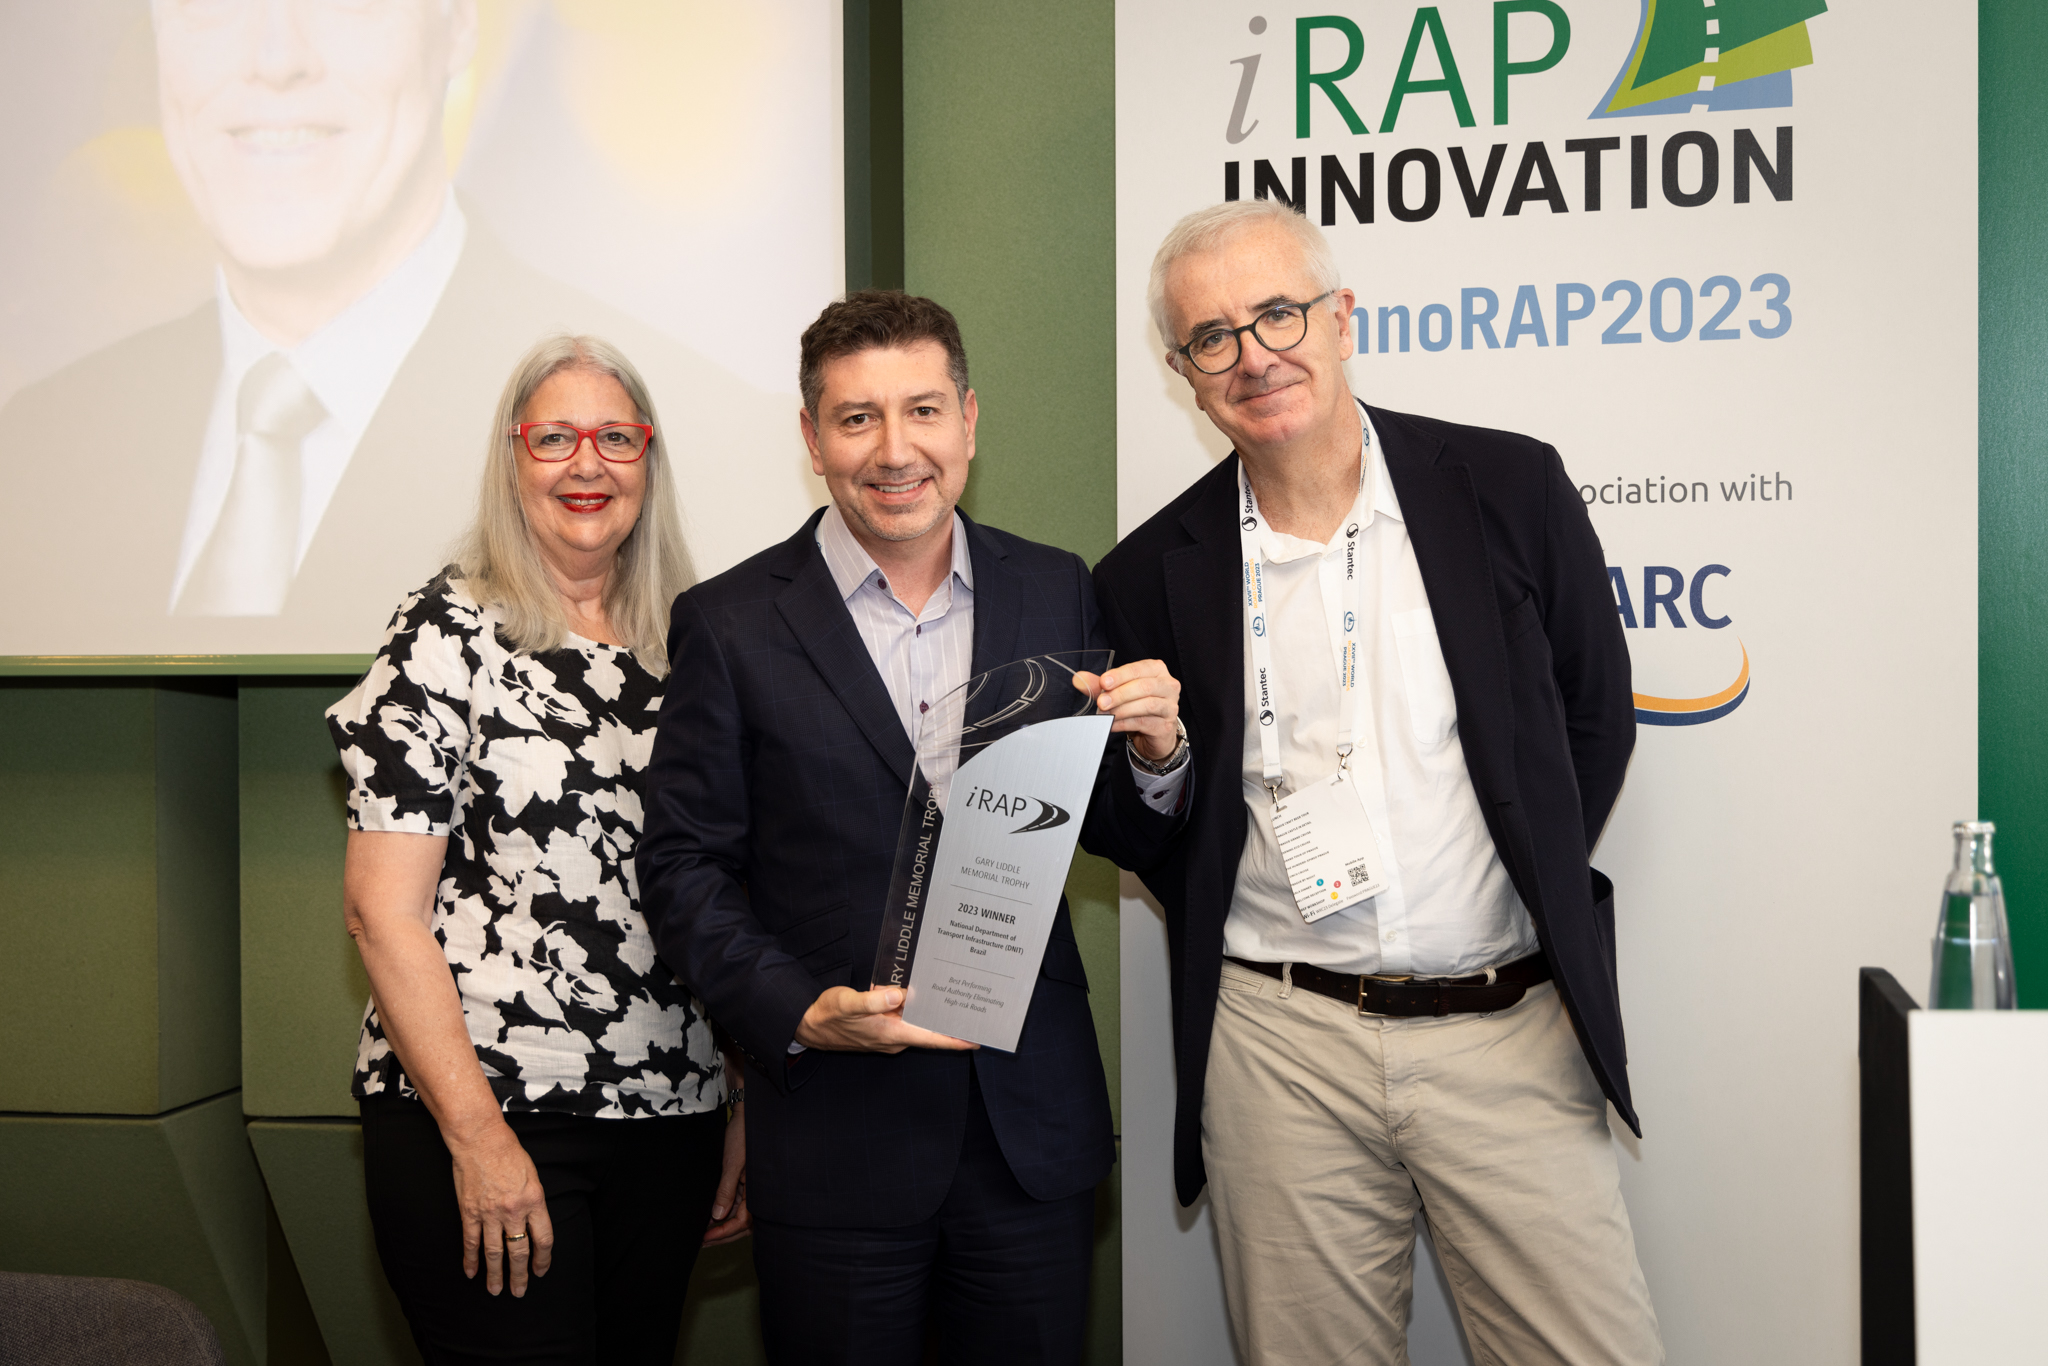 Julio Urzua, iRAP Strategic Projects Director accepts the Winner Trophy on behalf of DNIT -with Mrs Meredith Liddle and Miquel Nadal, iRAP Board Chairman